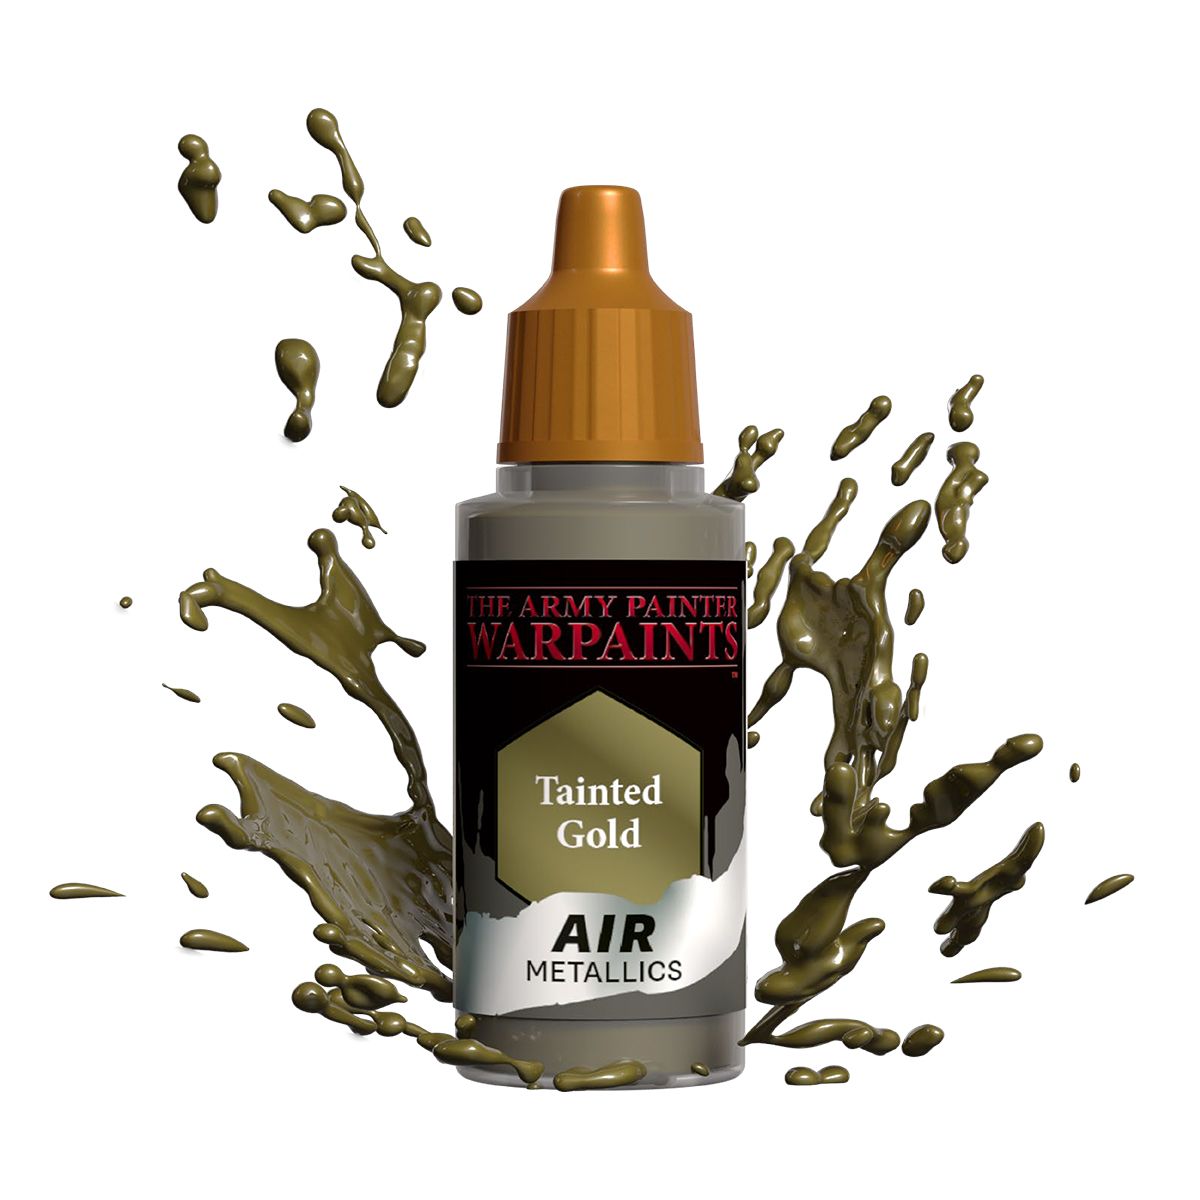 Army Painter Warpaints Air Metallic: Tainted Gold 18ml